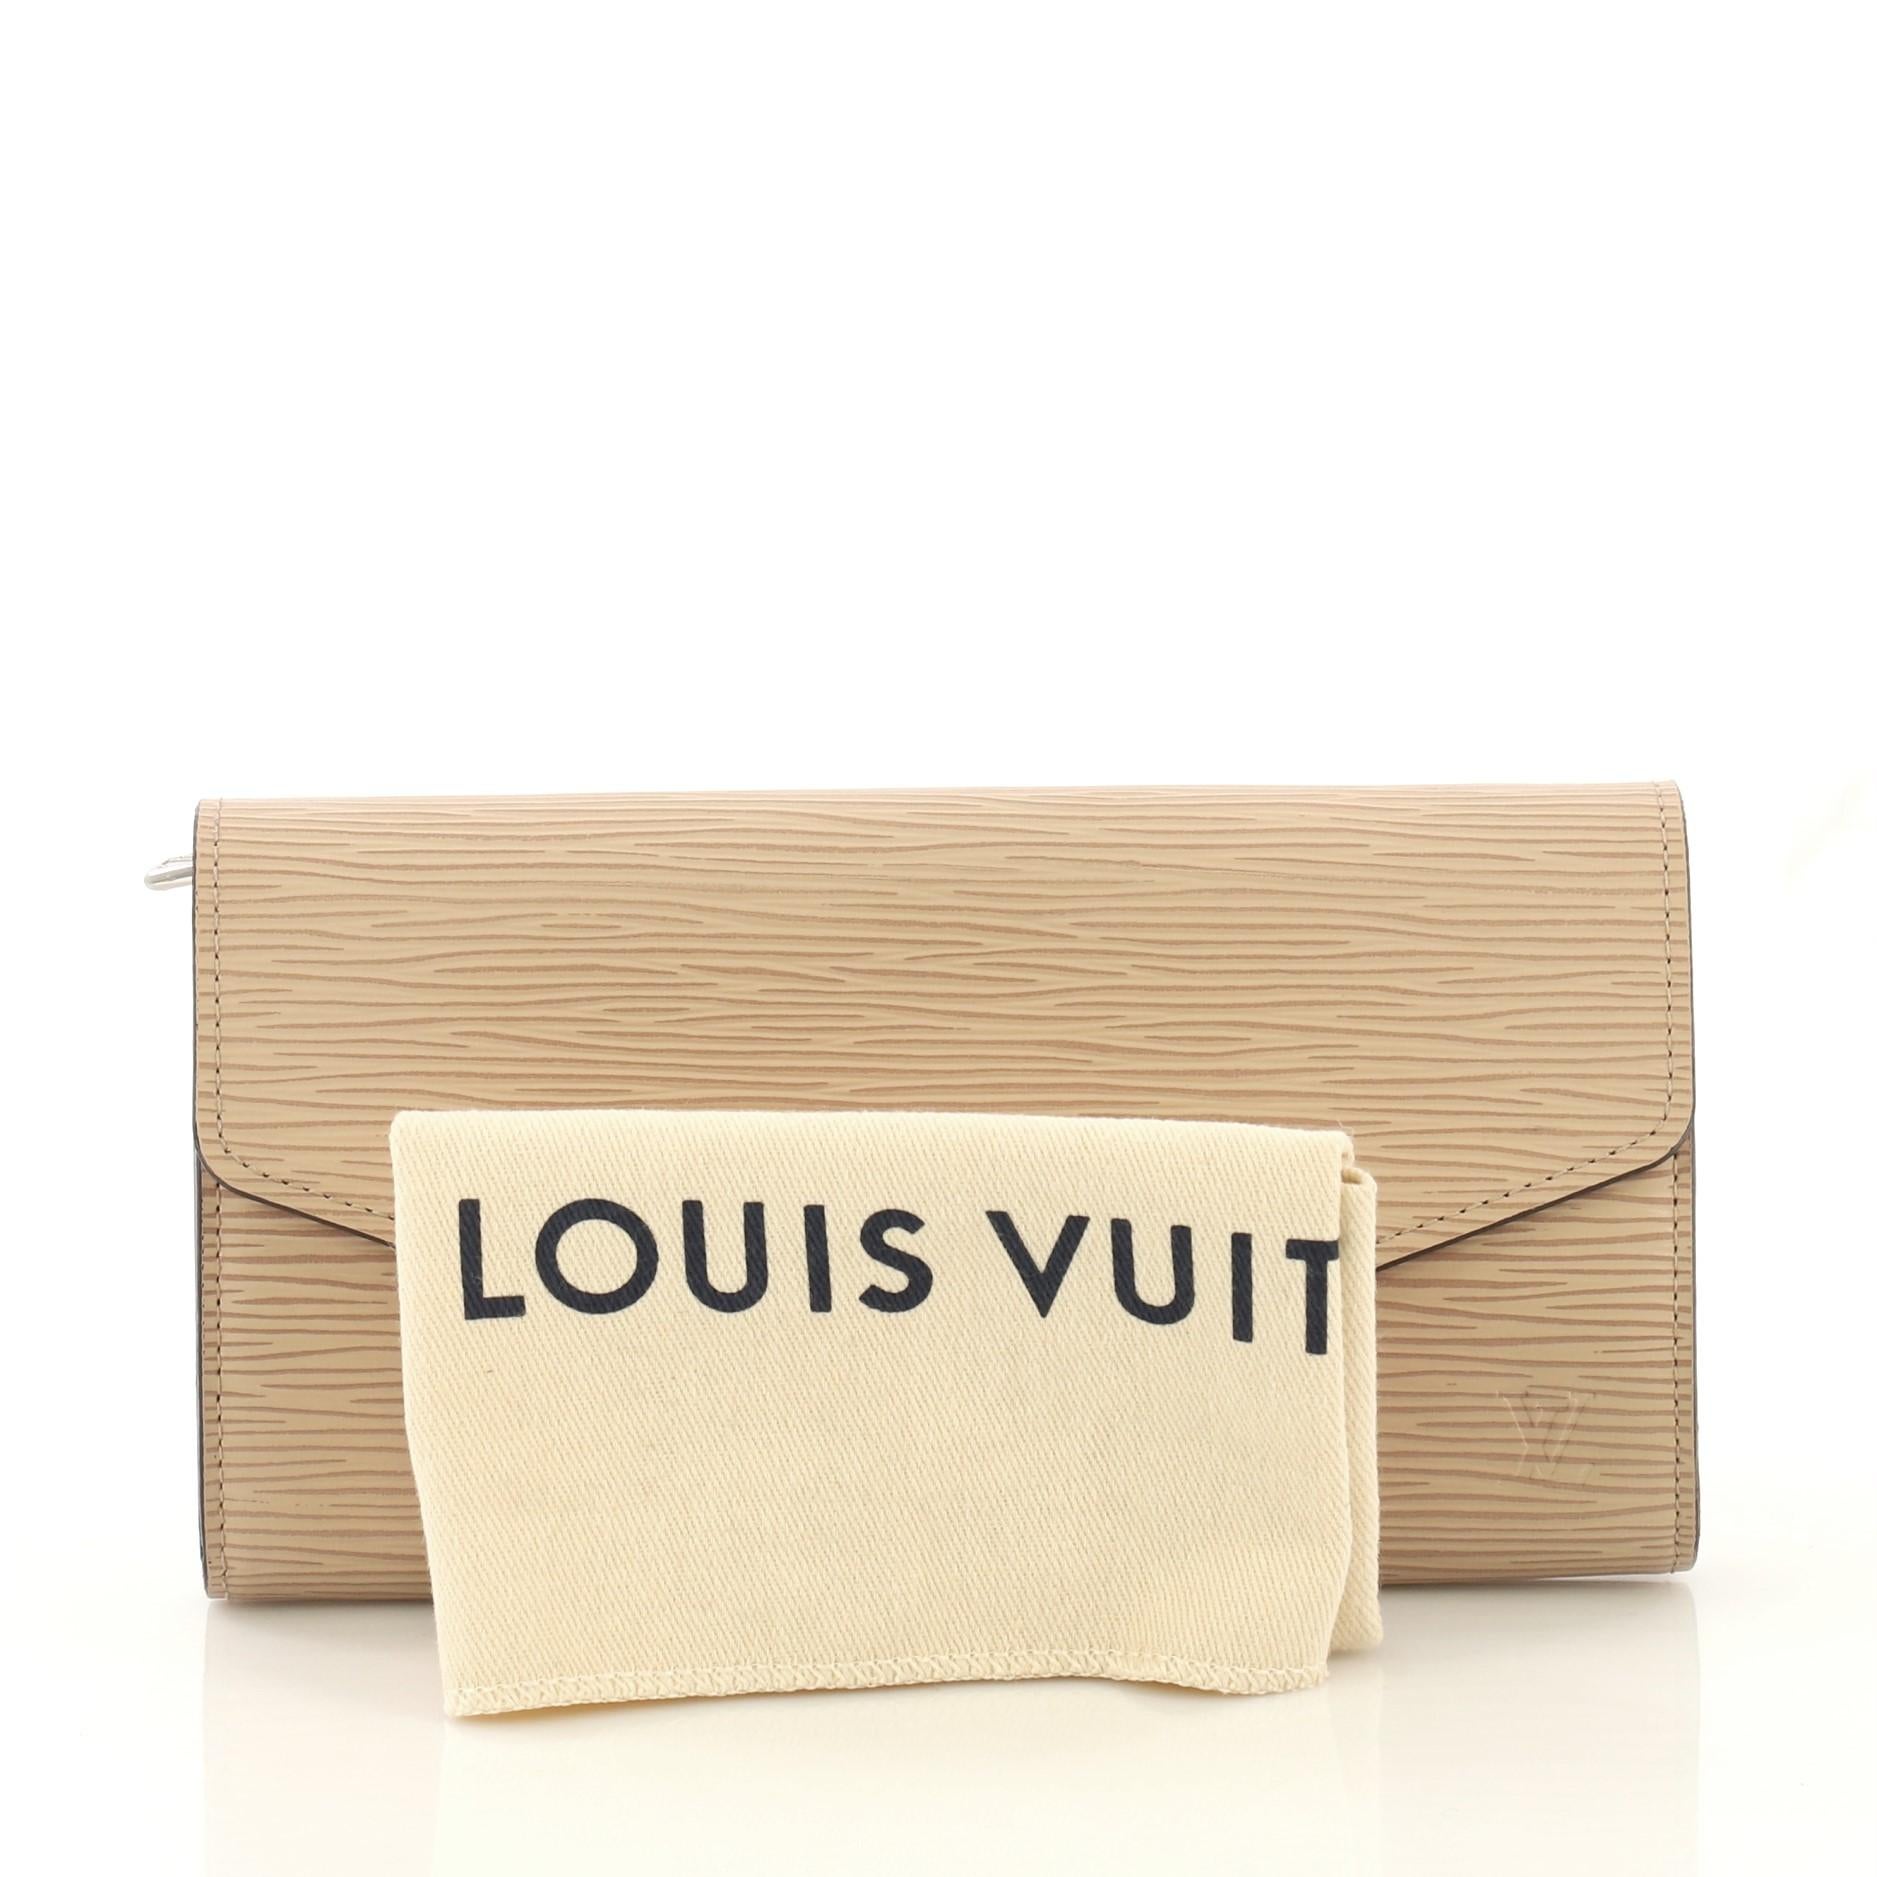 This Louis Vuitton Sarah Wallet NM Epi Leather, crafted in neutral epi leather, features an envelope-style frontal flap and silver-tone hardware. Its snap button closure opens to a neutral leather interior with multiple card slots, slip pockets, and